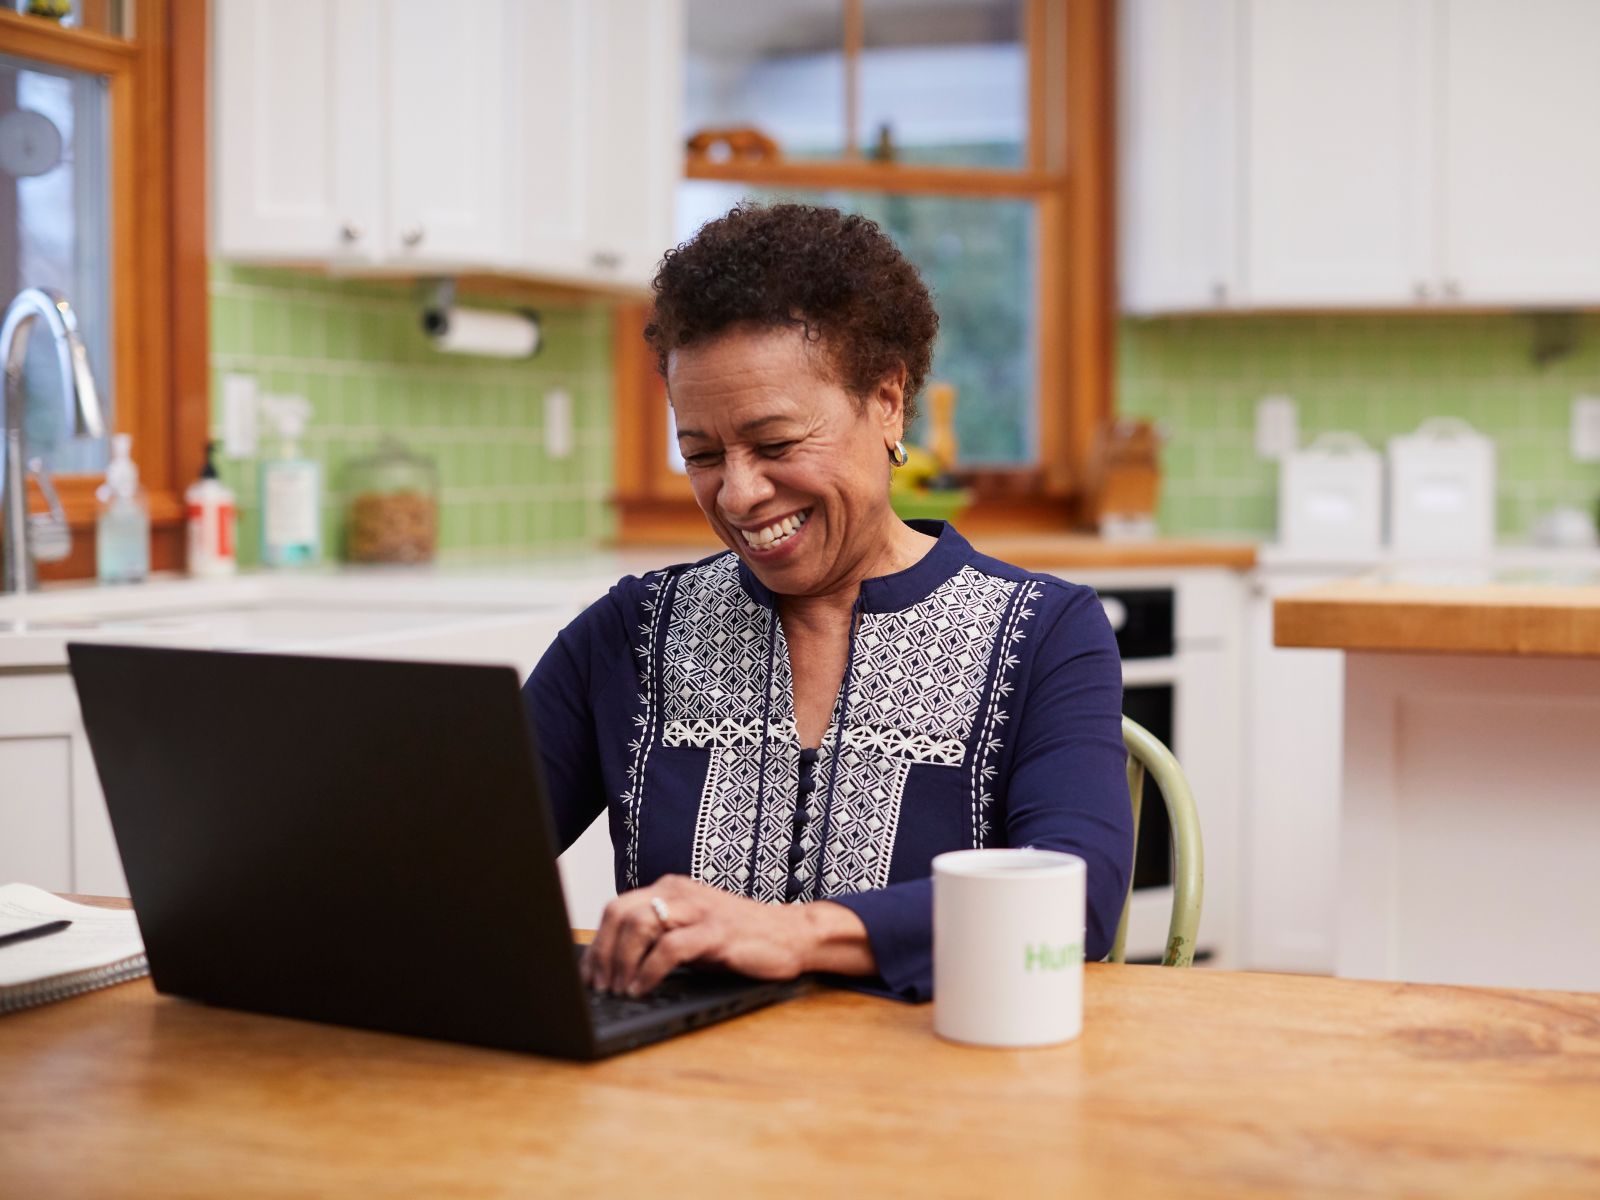 Woman smiling and using a laptop at a table.